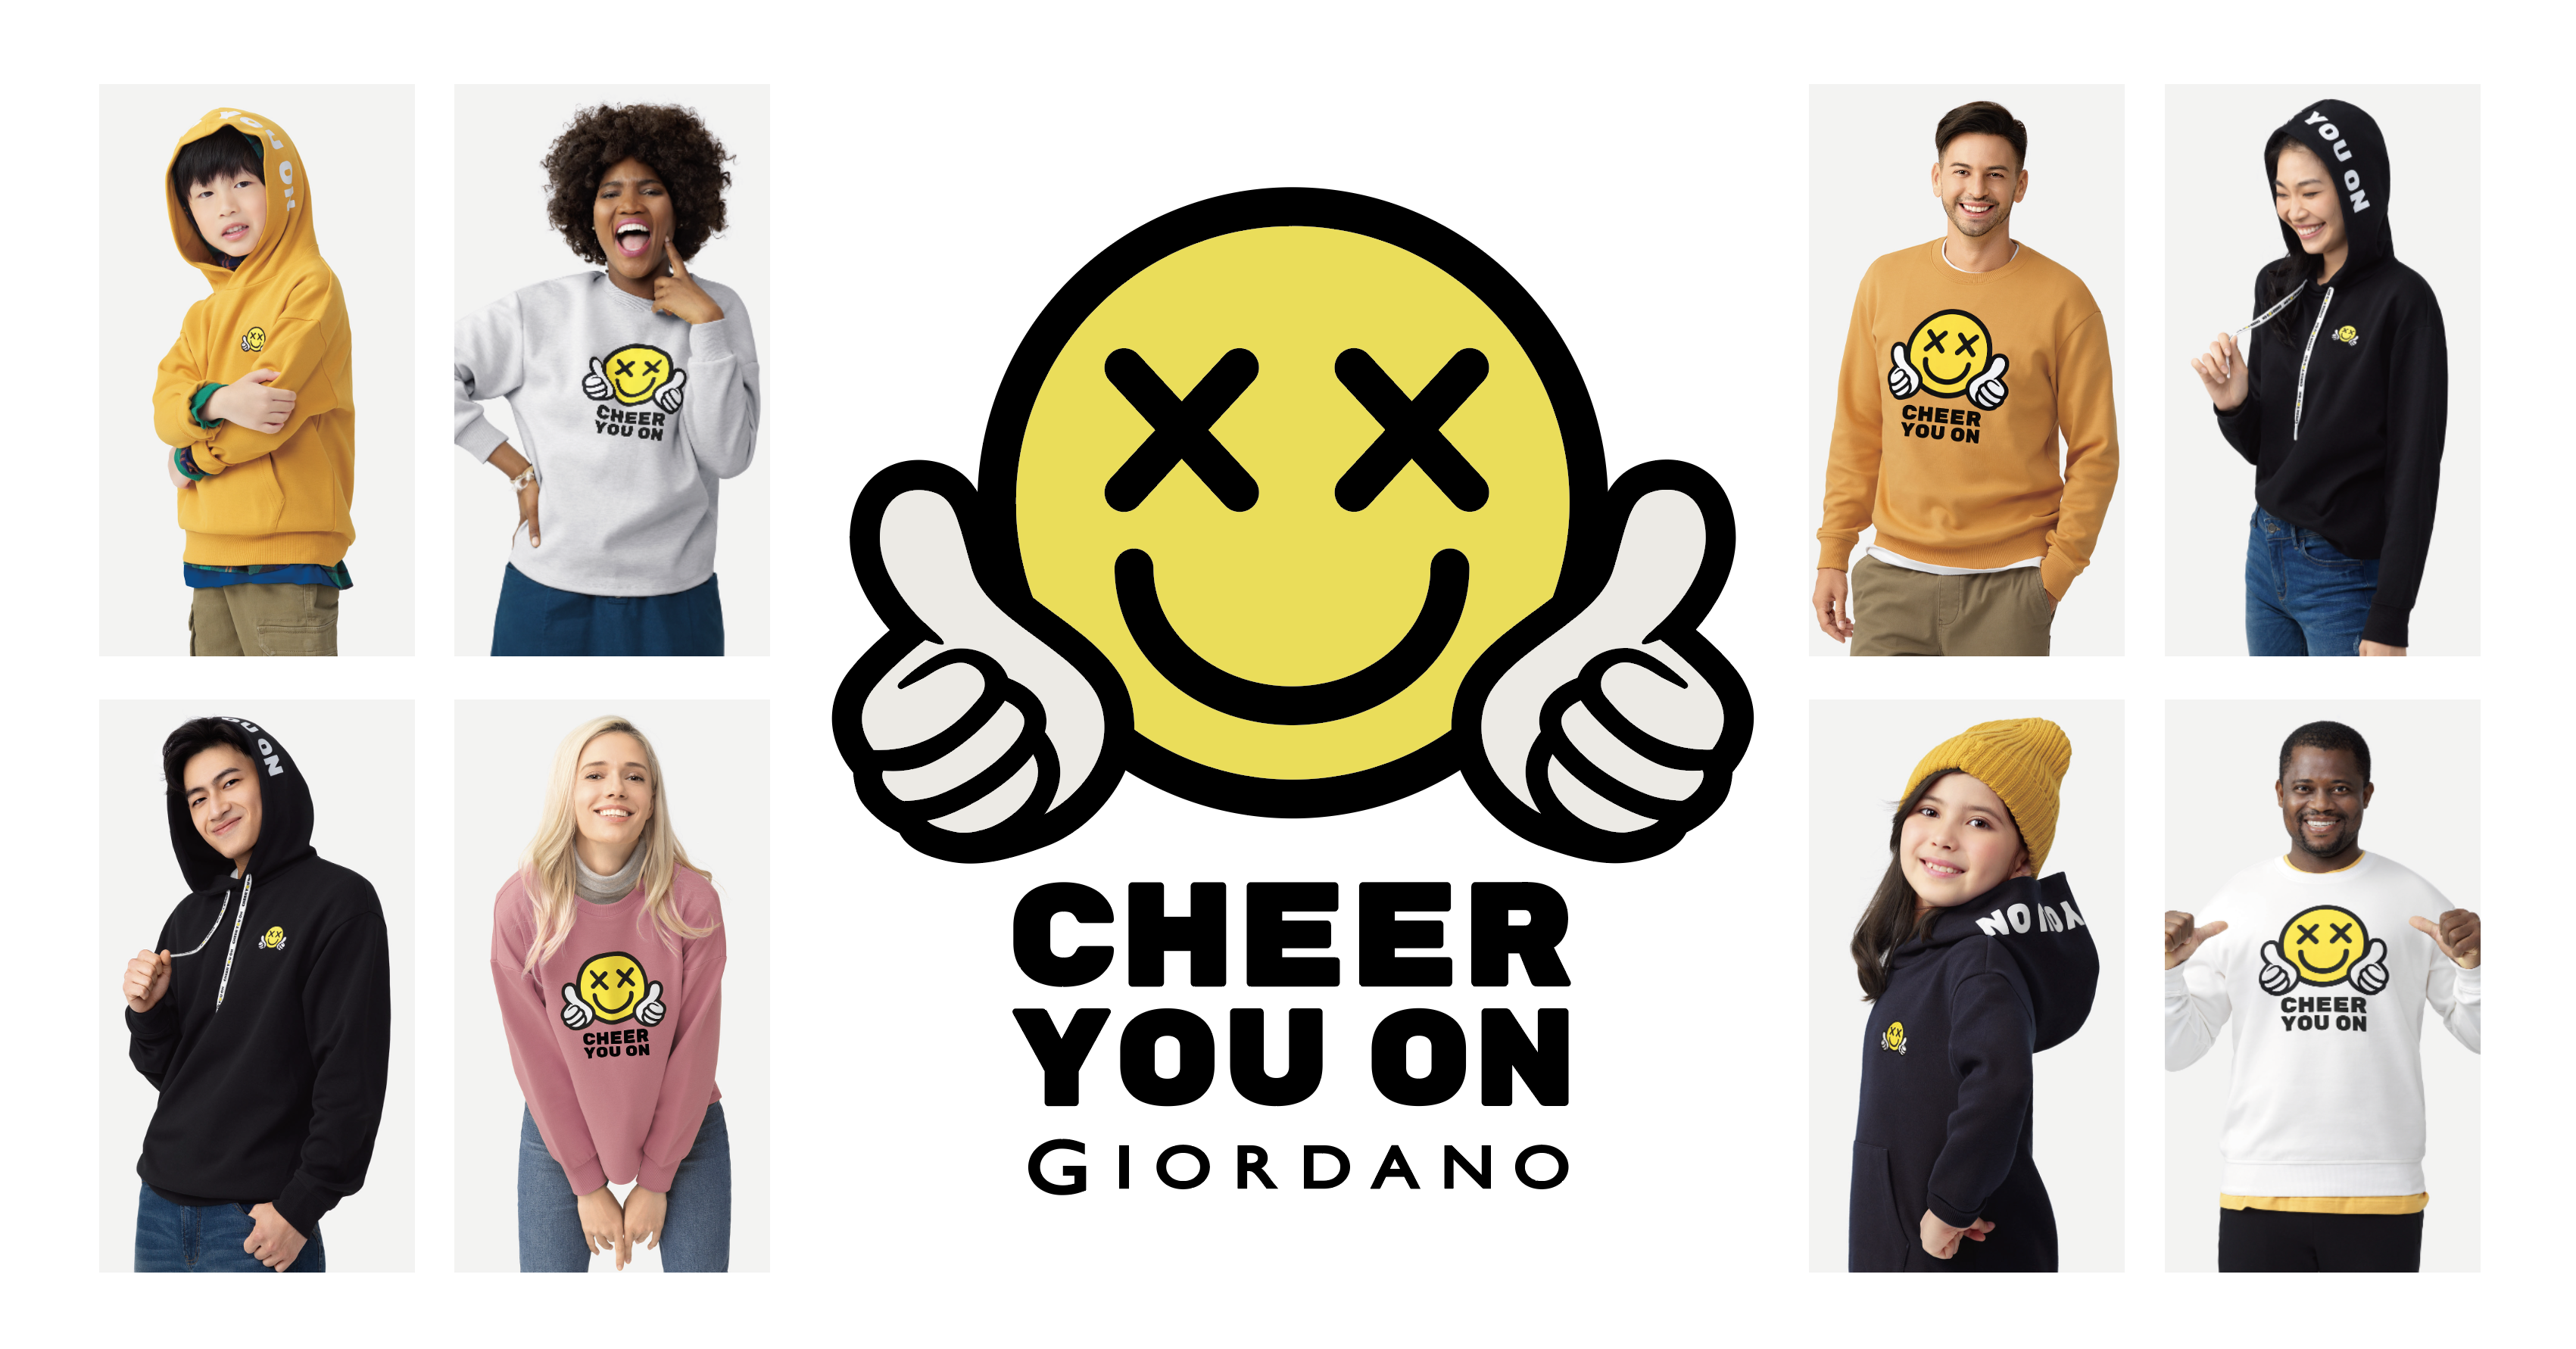 You are currently viewing 一起為彼此加油打氣！GIORDANO Cheer You On系列 歡樂登場